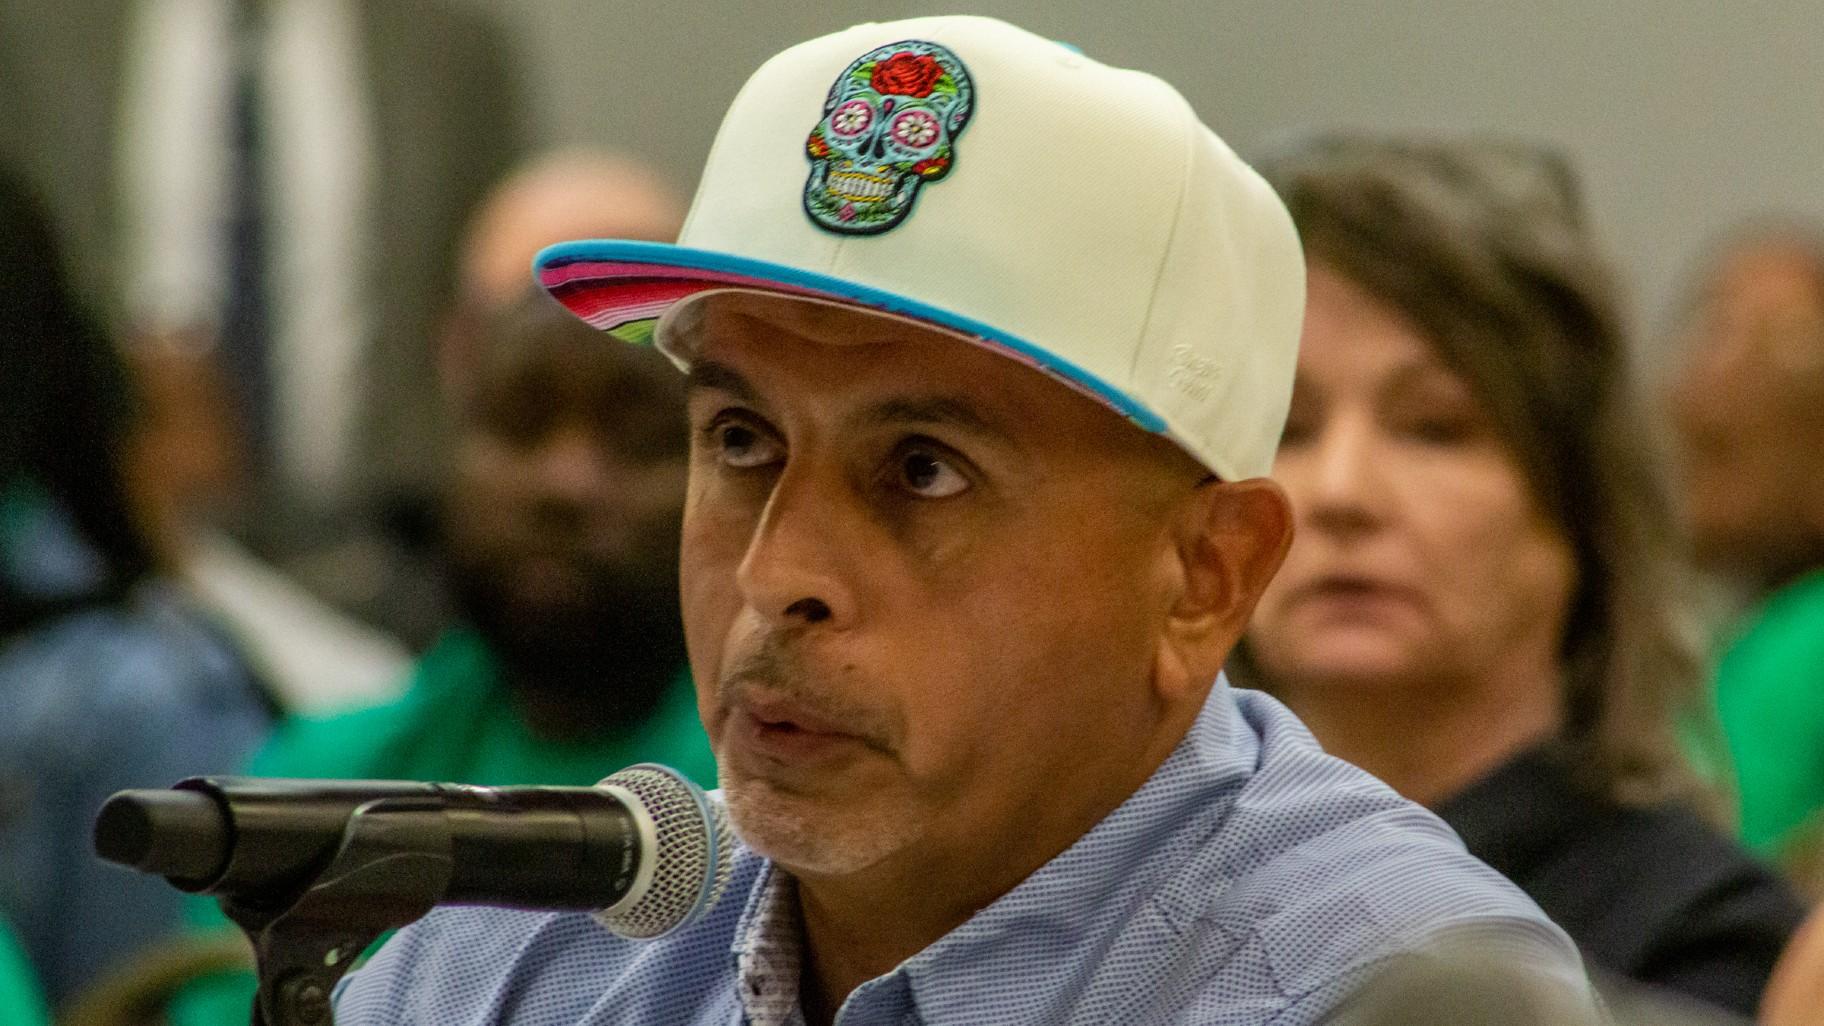 Jimmy Soto, who spent more than 42 years wrongfully incarcerated in state prisons, speaks to the Commission on Government Forecasting and Accountability at a public hearing in Joliet on June 11, 2024. (Dilpreet Raju / Capitol News Illinois)